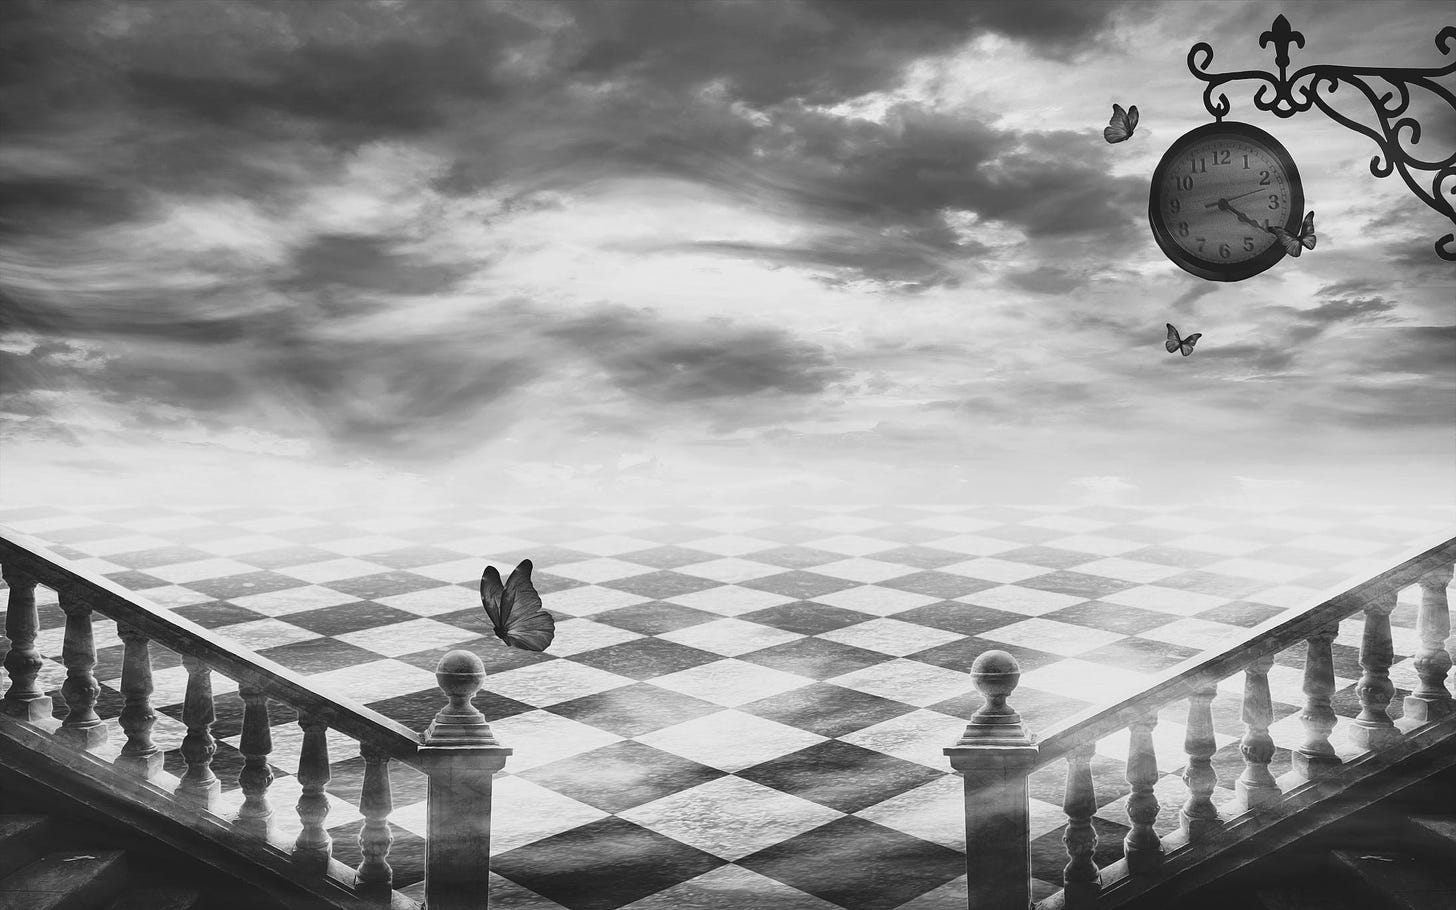 Image of the chessboard, presumably from Alice in Wonderland. The sky above is filled with dark clouds, w/some light peaking through.